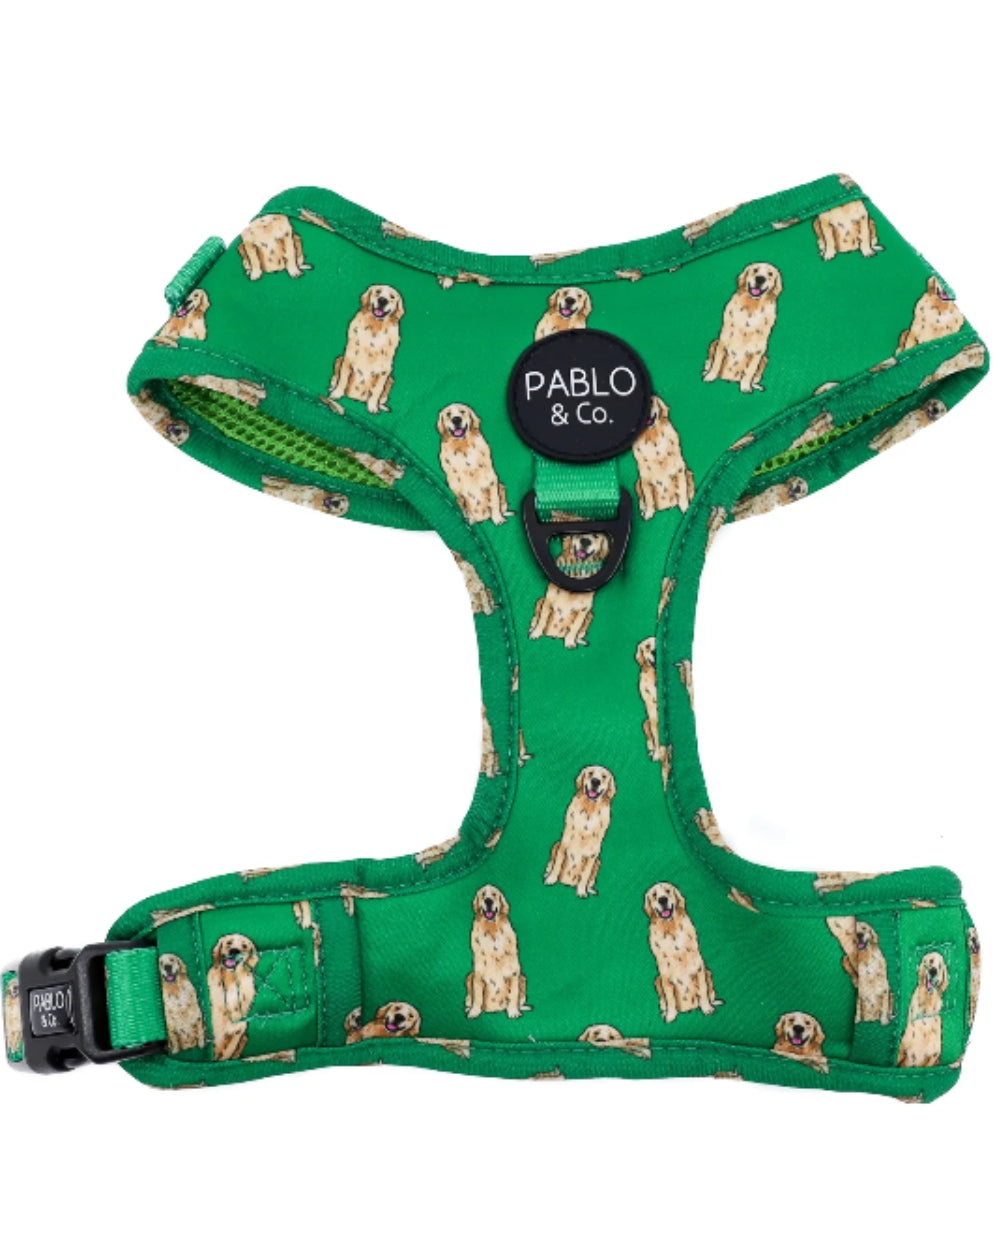 Pablo and Co Golden Retriever Adjustable Dog Harness